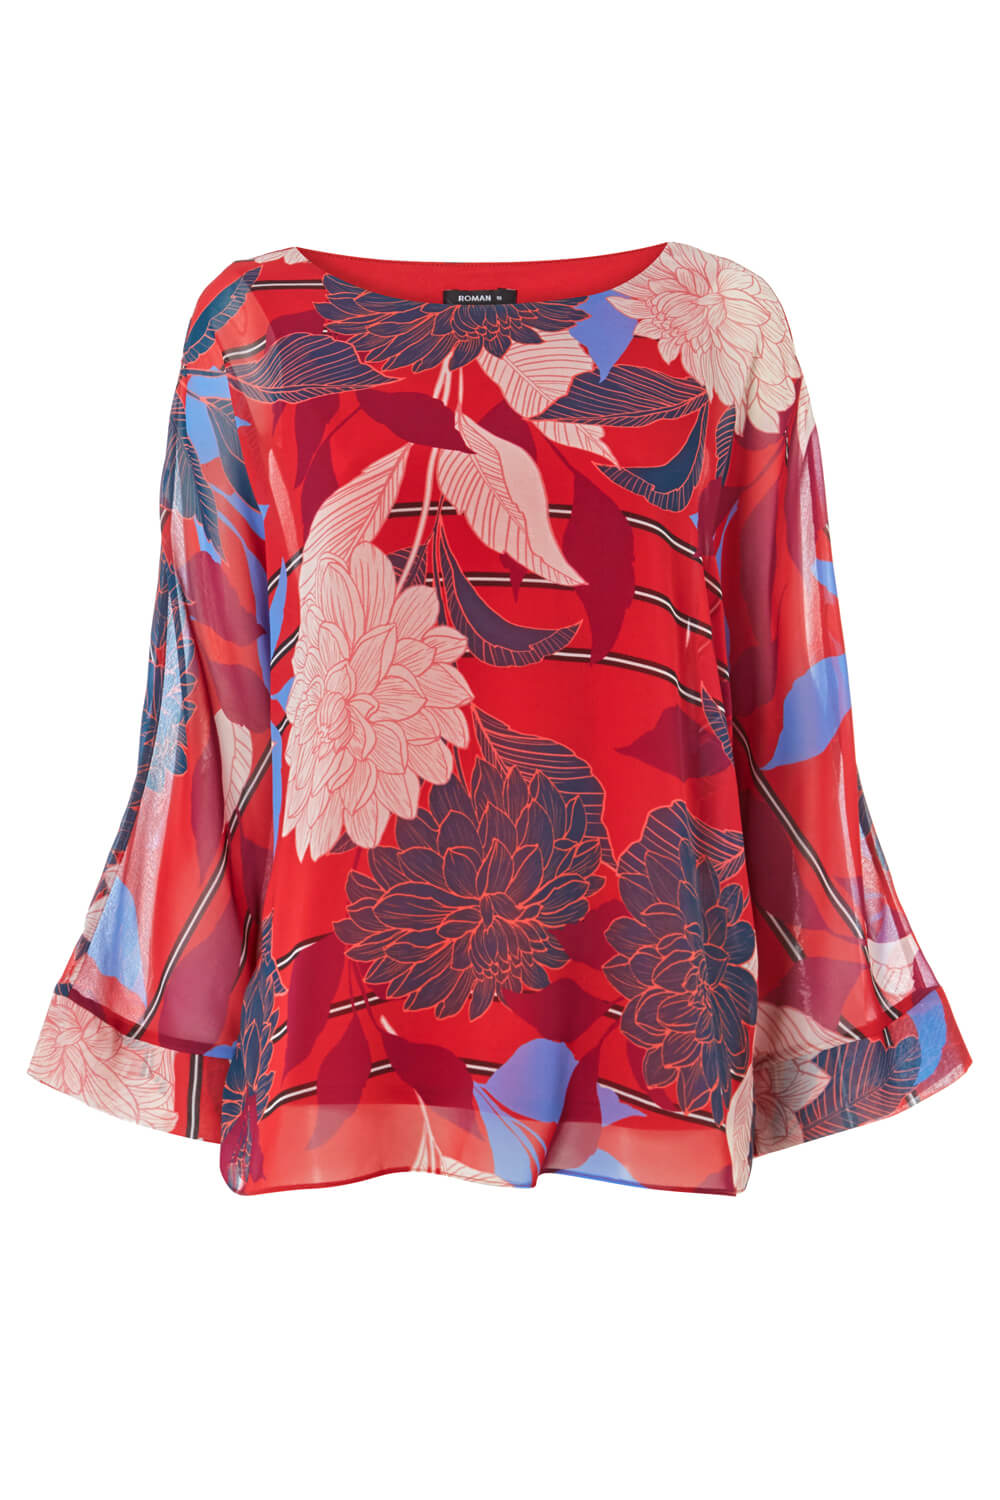 Red Floral Overlay Chiffon Top, Image 5 of 5